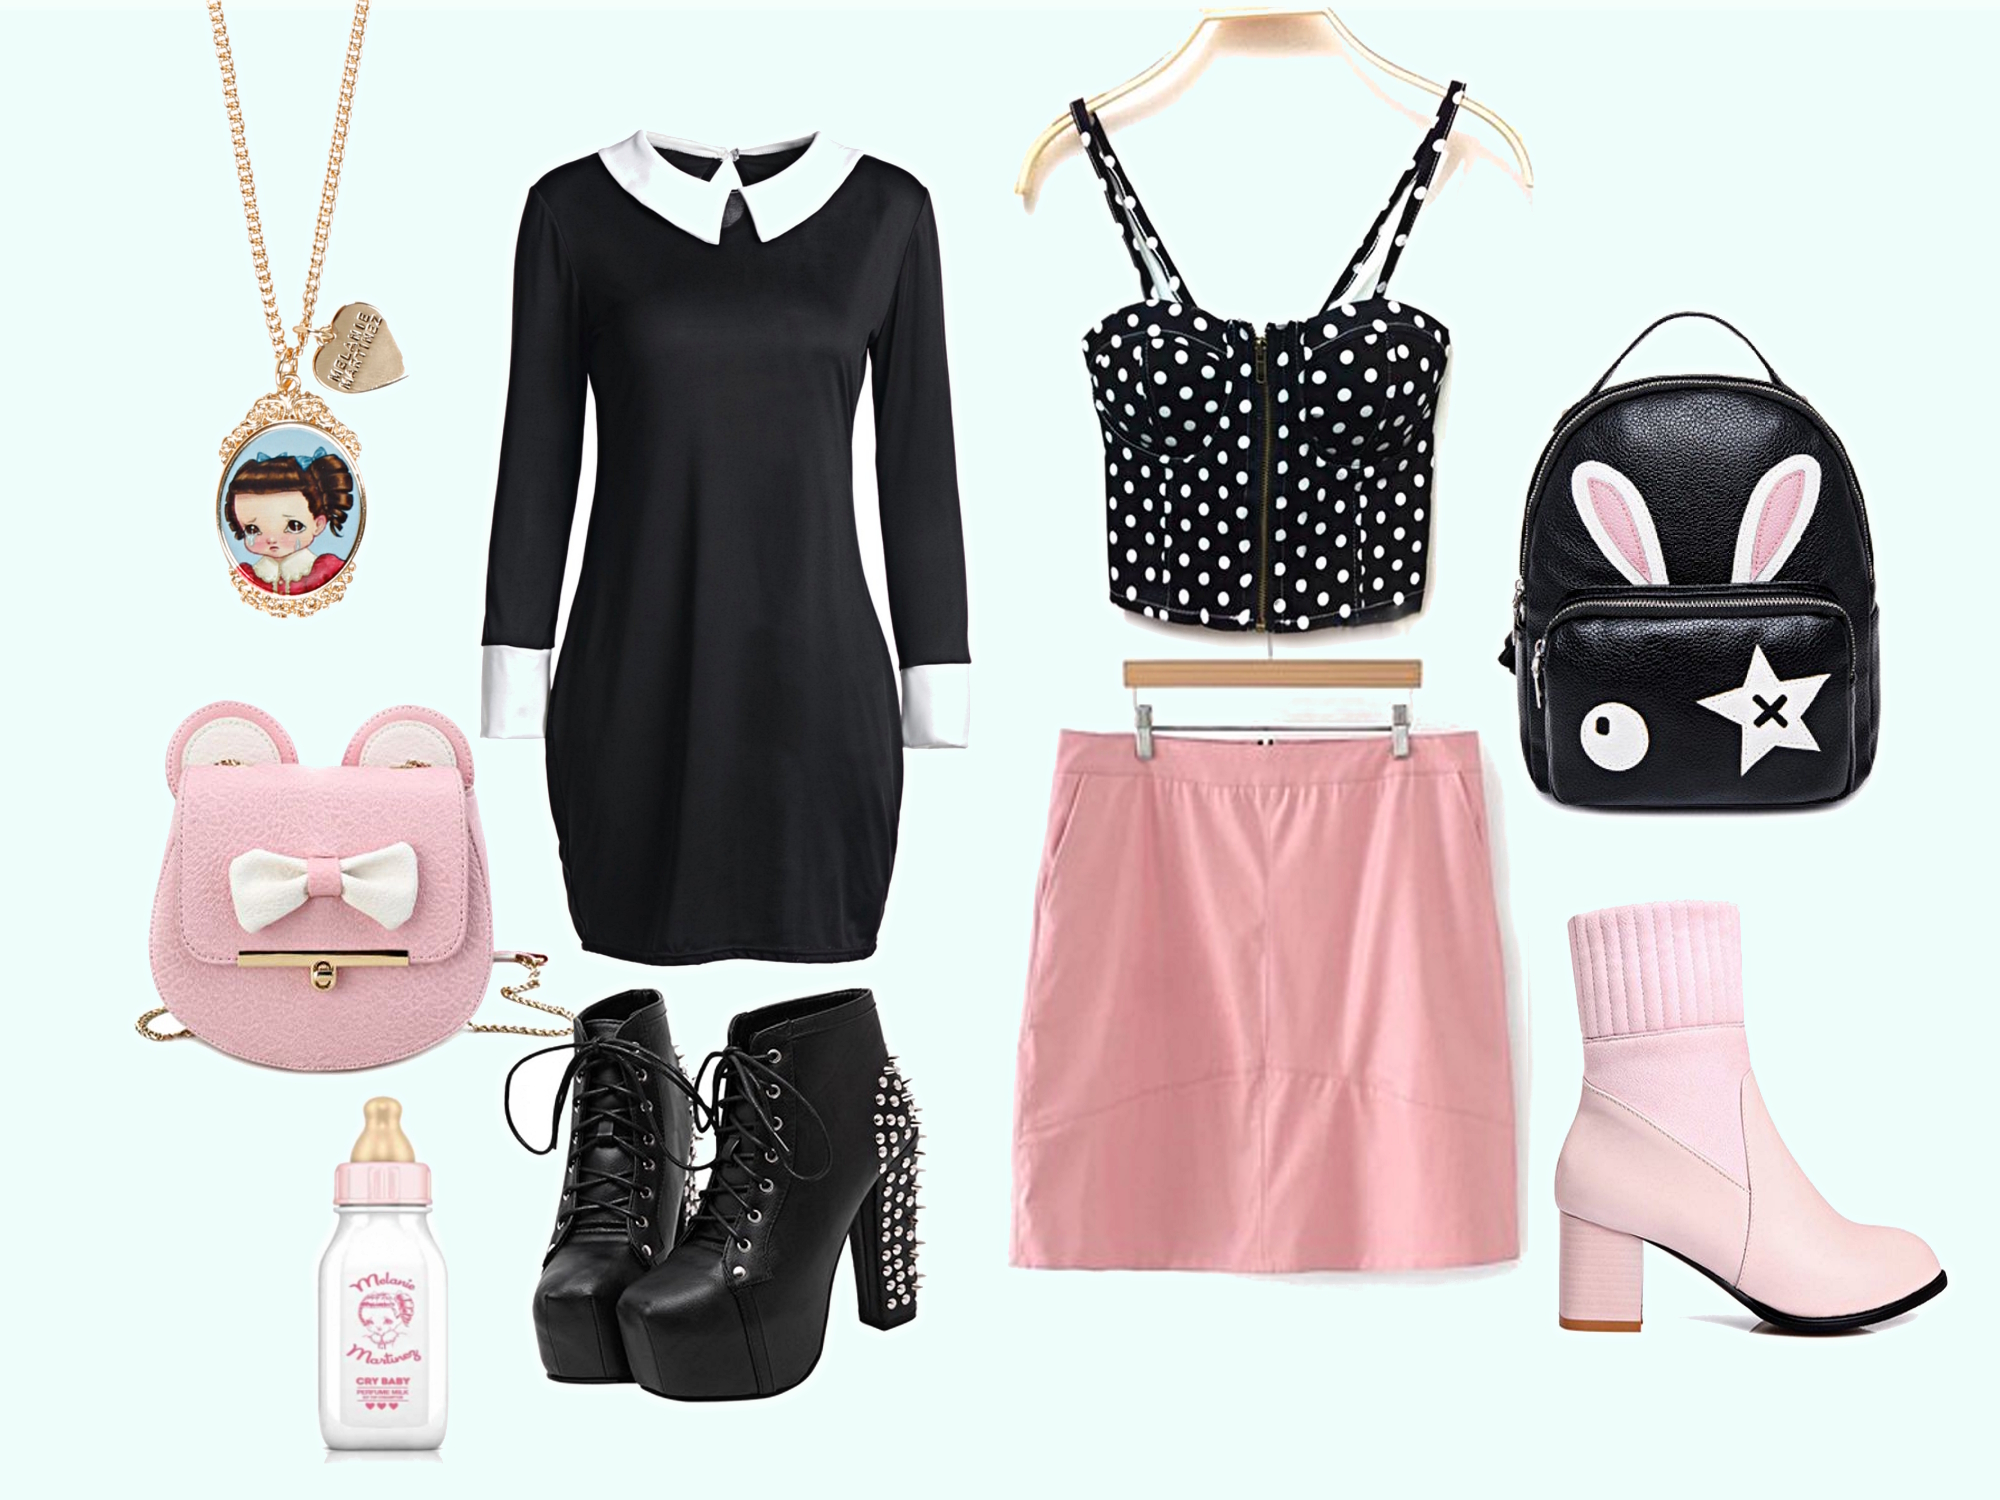 fashion collage with clothing inspired by Melanie Martinez fashion style